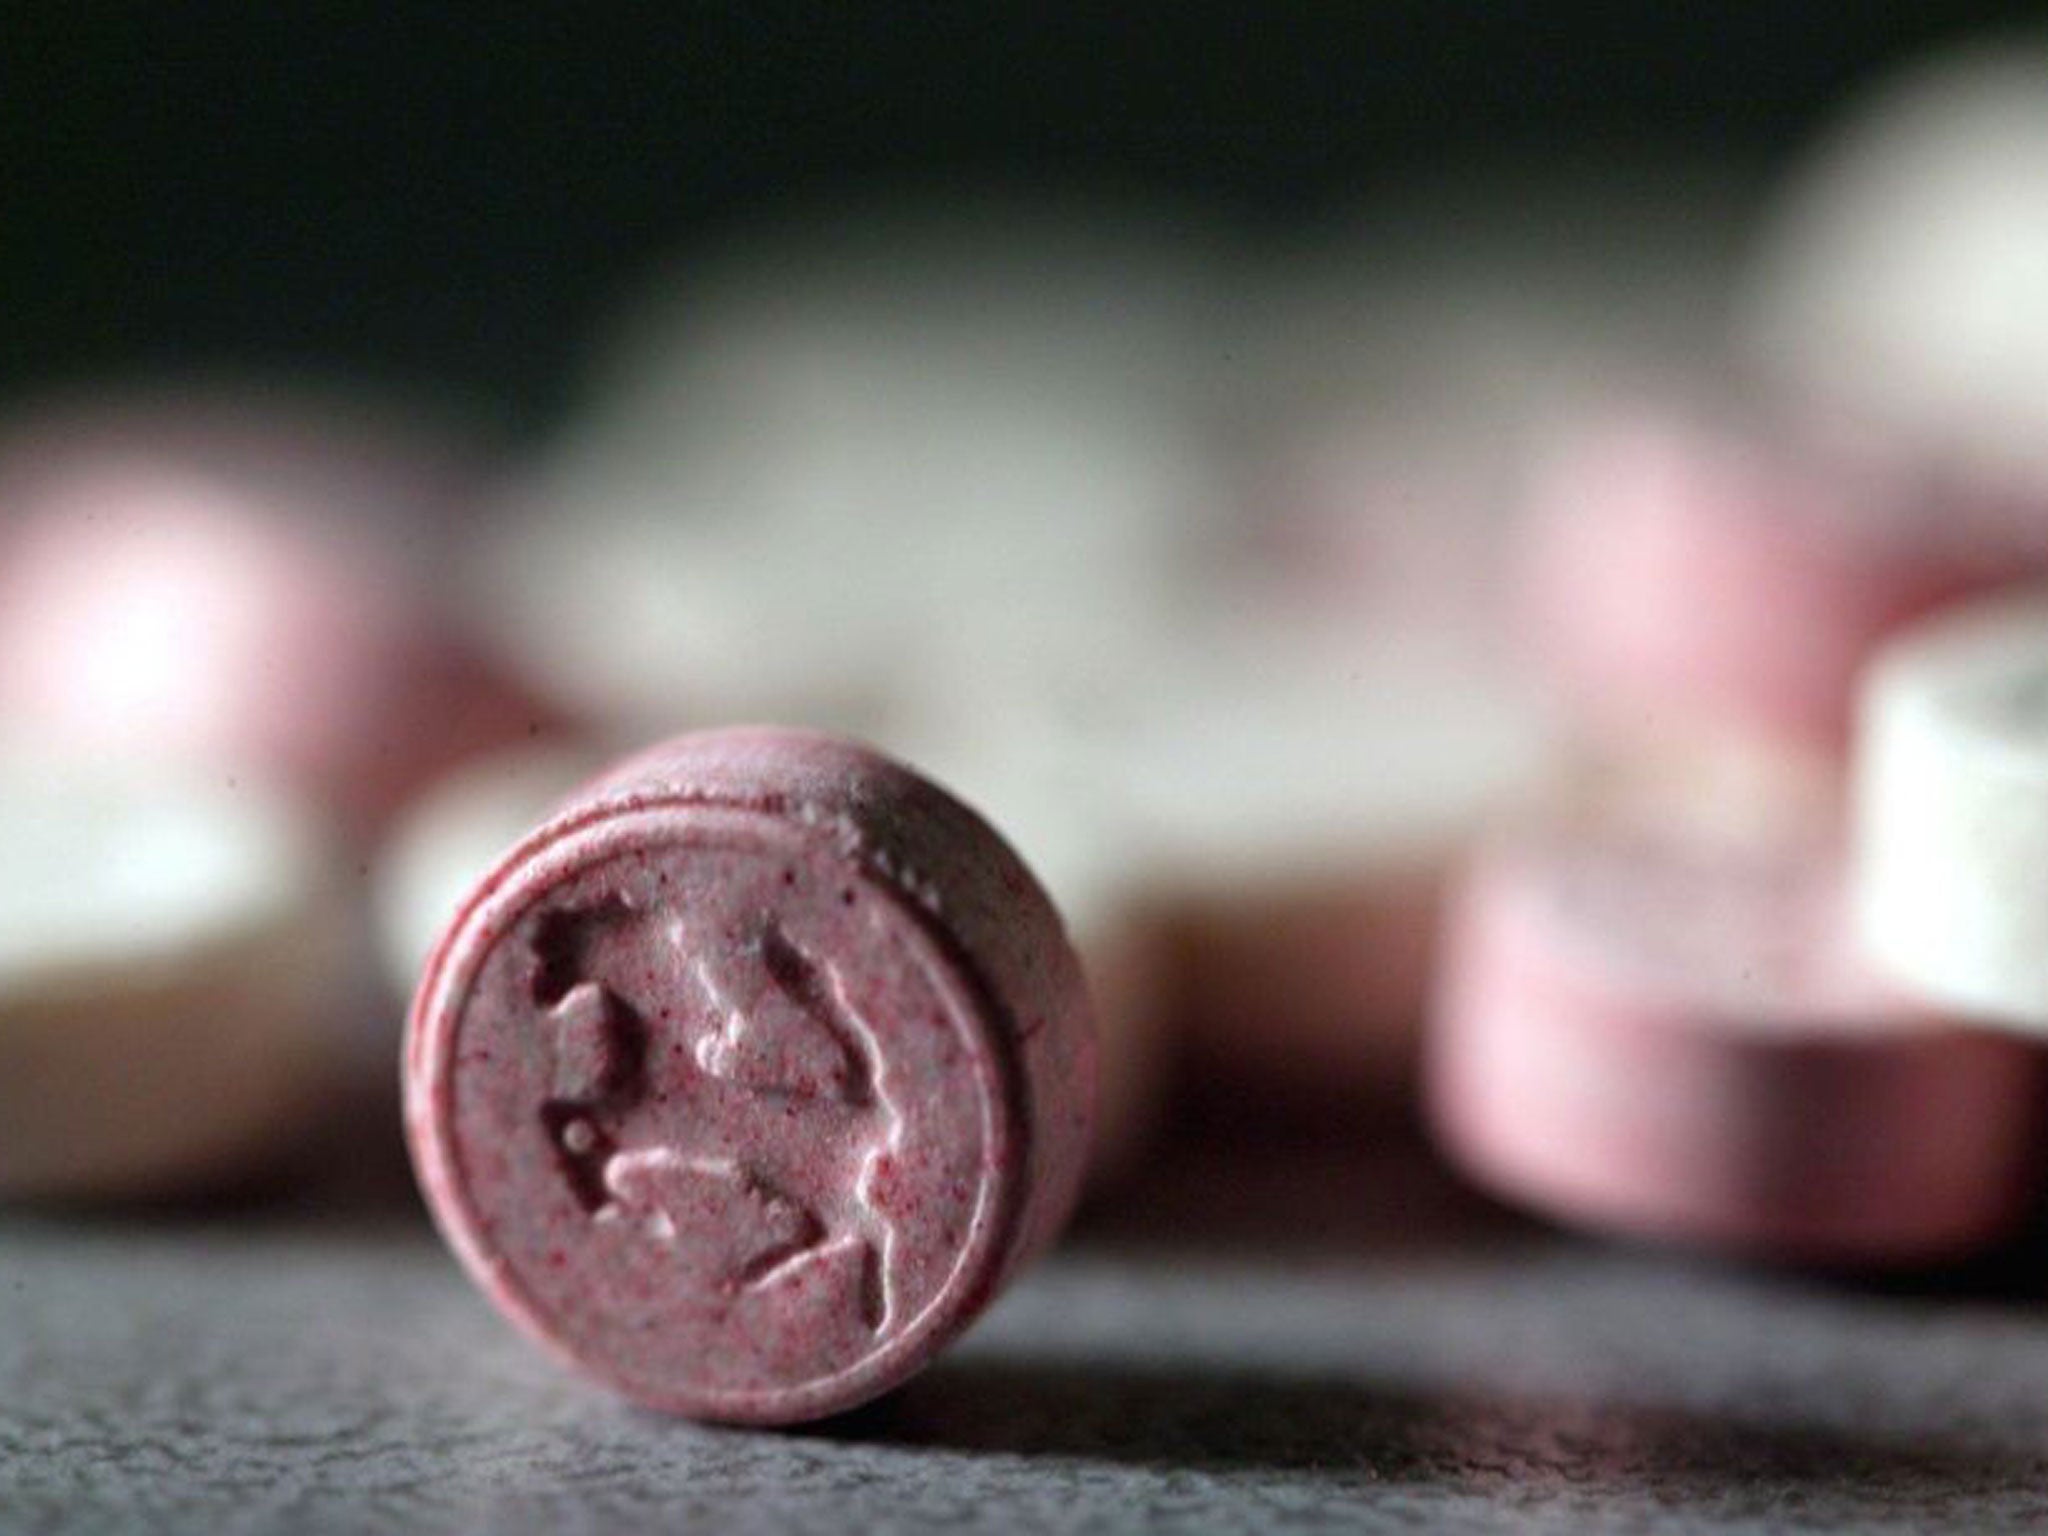 Could we be doing more to prevent deaths caused by drug use?